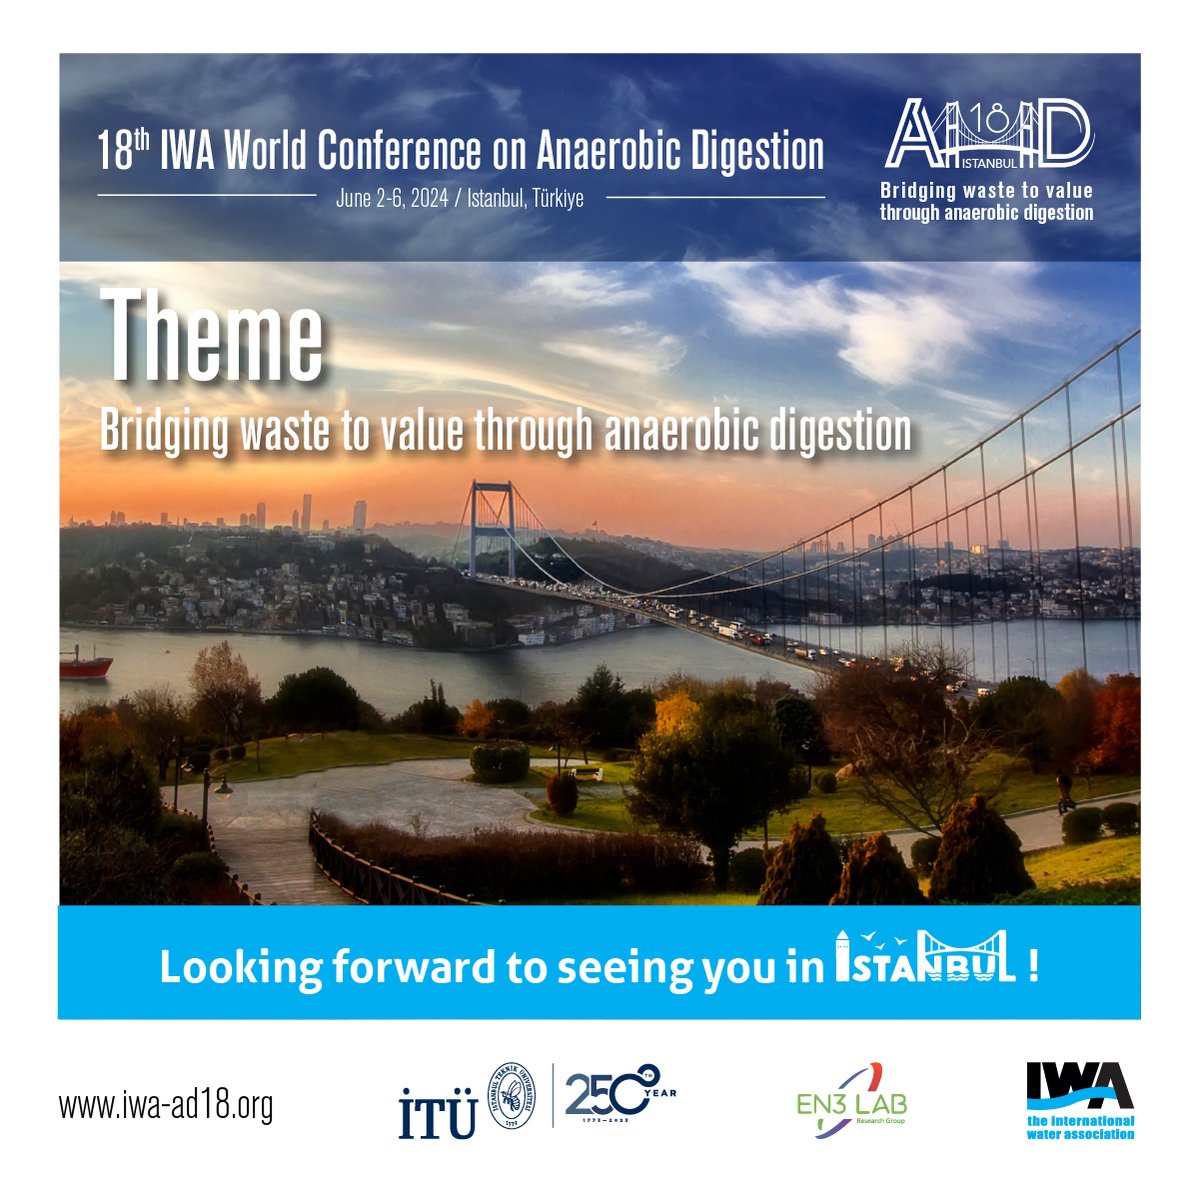 Looking to keep up with the latest news about 18thIWA World Conference on Anaerobic Digestion to be held in Istanbul on 2-6 June 2024? Visit our website and connect with fellow attendees using the event hashtag! #AD18 #anaerobicdigestion iwa-ad18.org